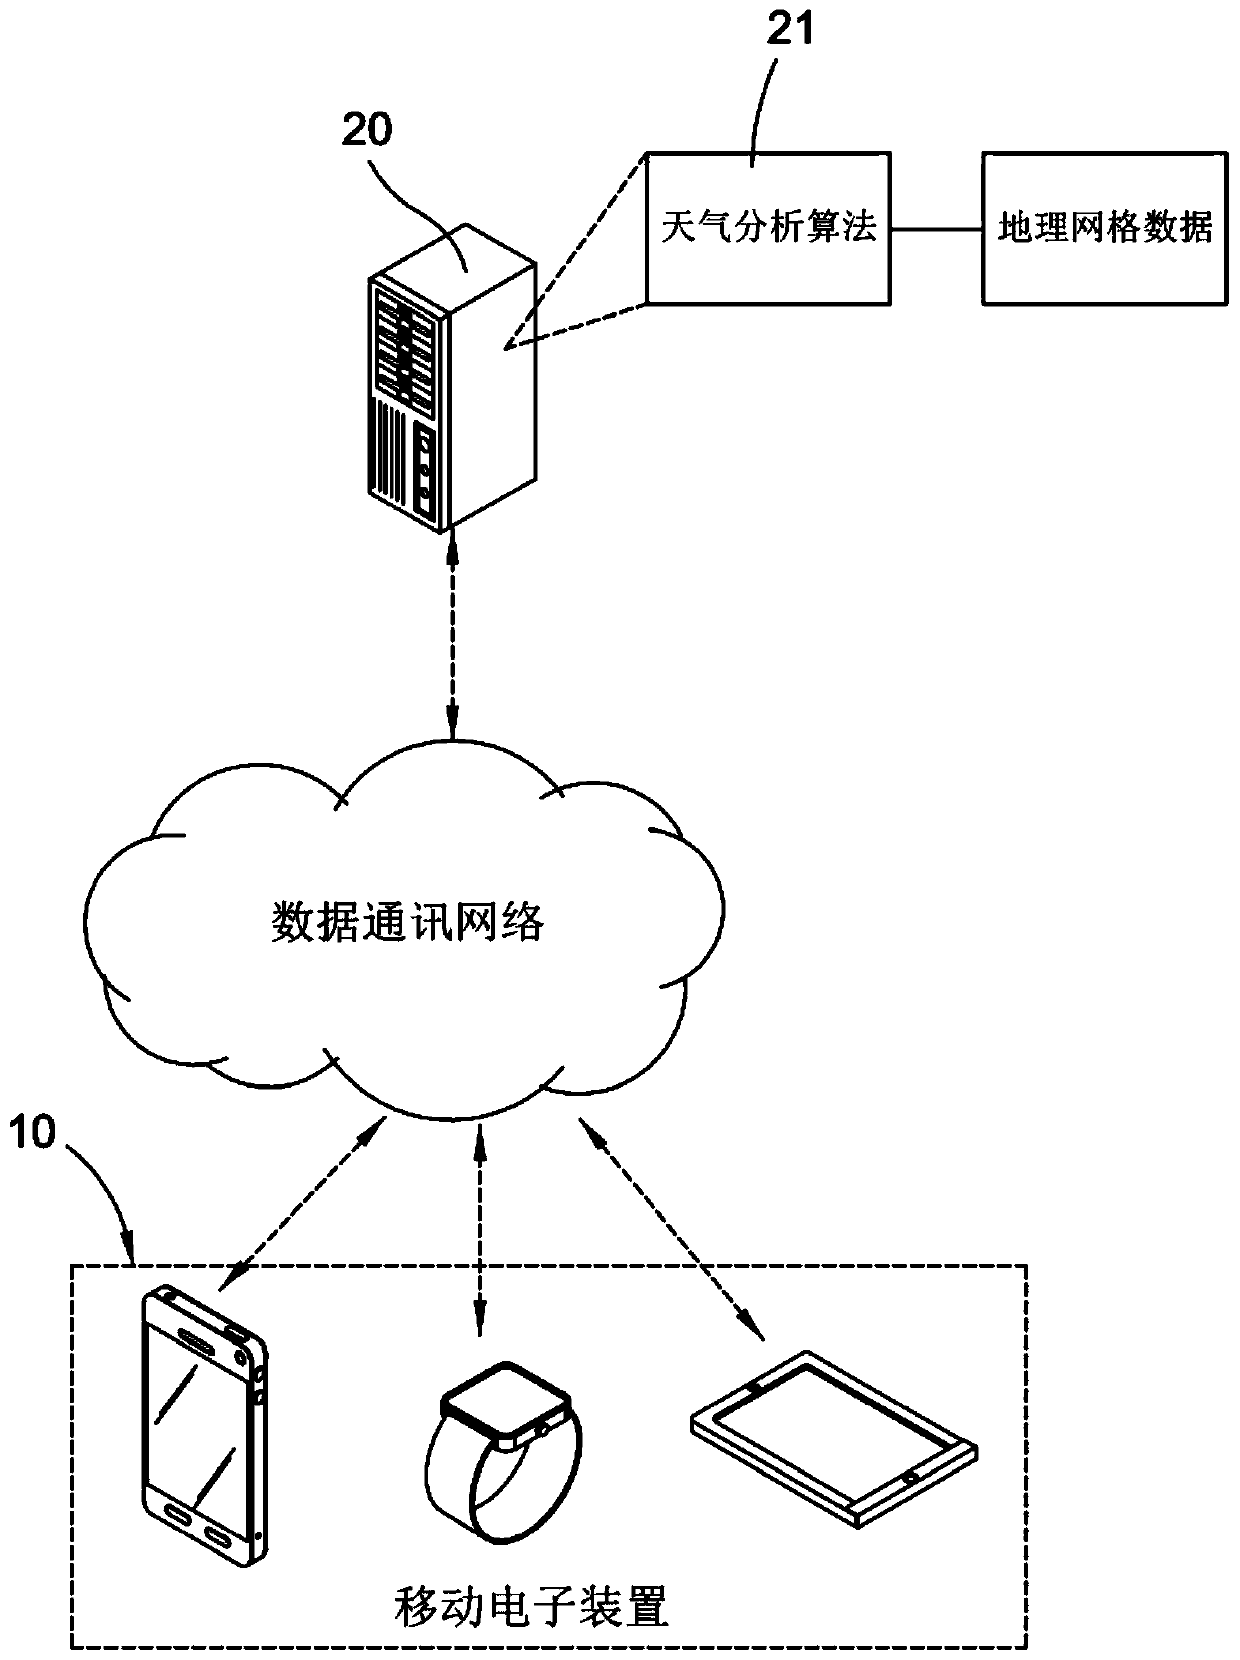 A weather observation method and system based on a mobile electronic device